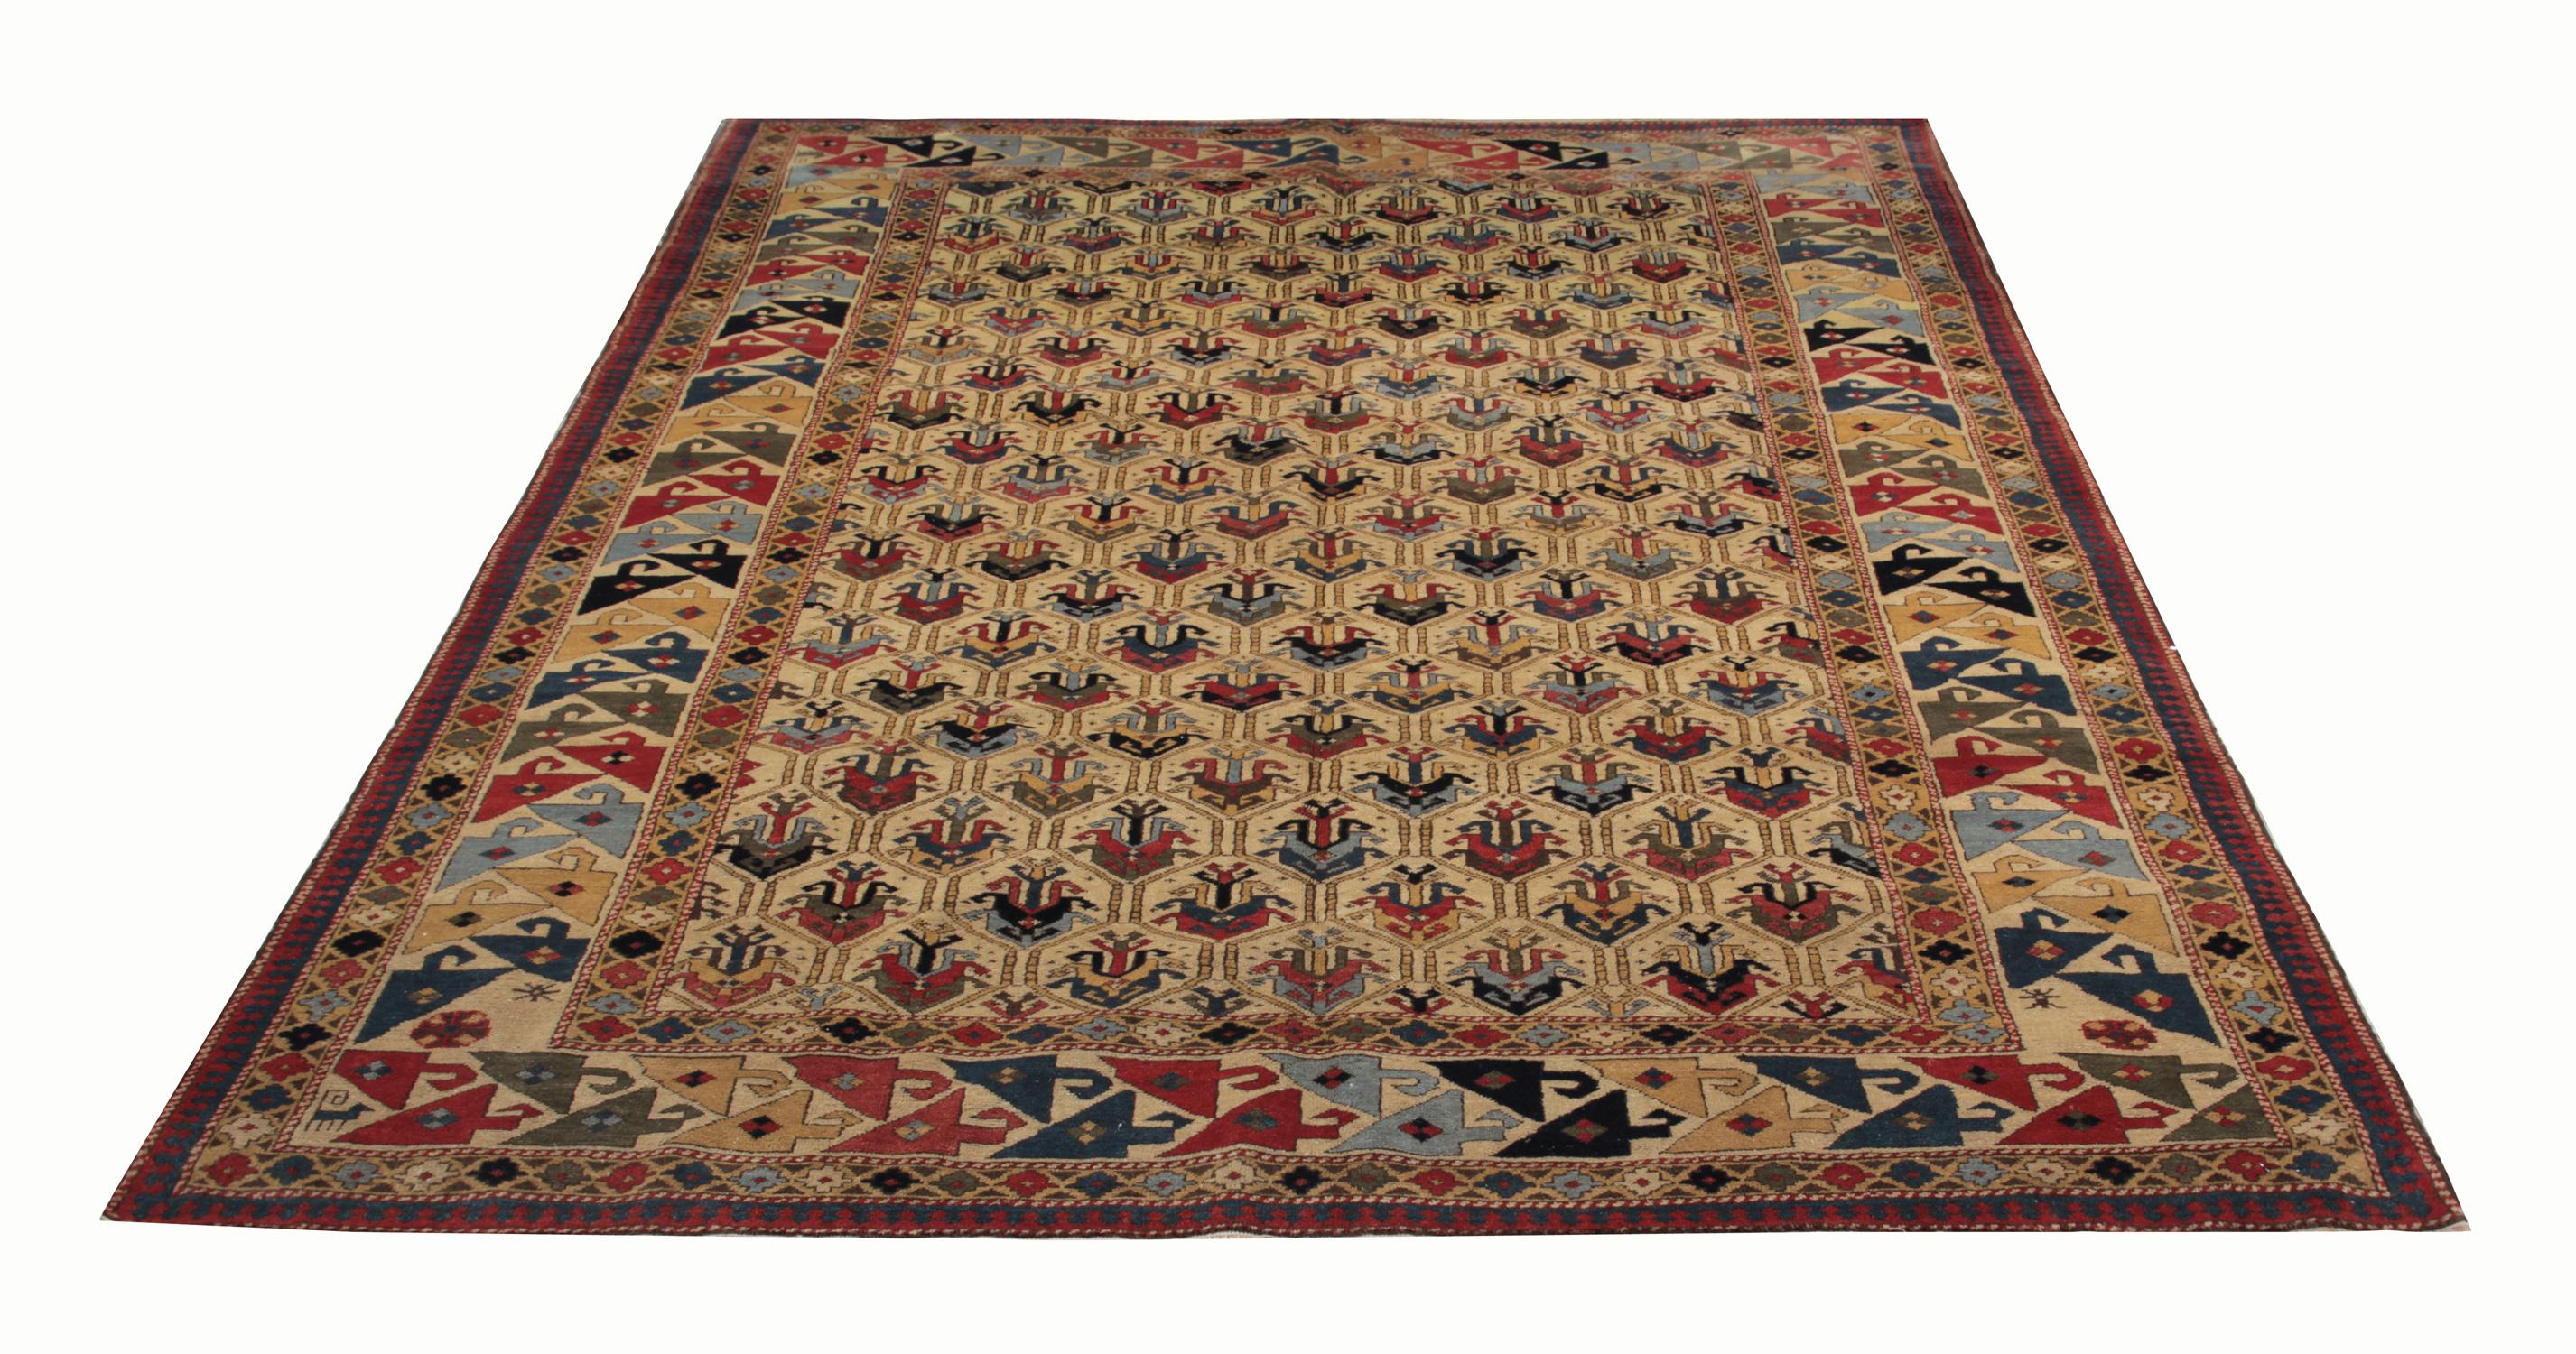 An excellent example of traditional Caucasian carpet rug weaving from the Shirvan region. Though these gold-beige ground all over design patterned rugs may seem like from a distance, but this woven rug has a great range of colors. This geometric rug